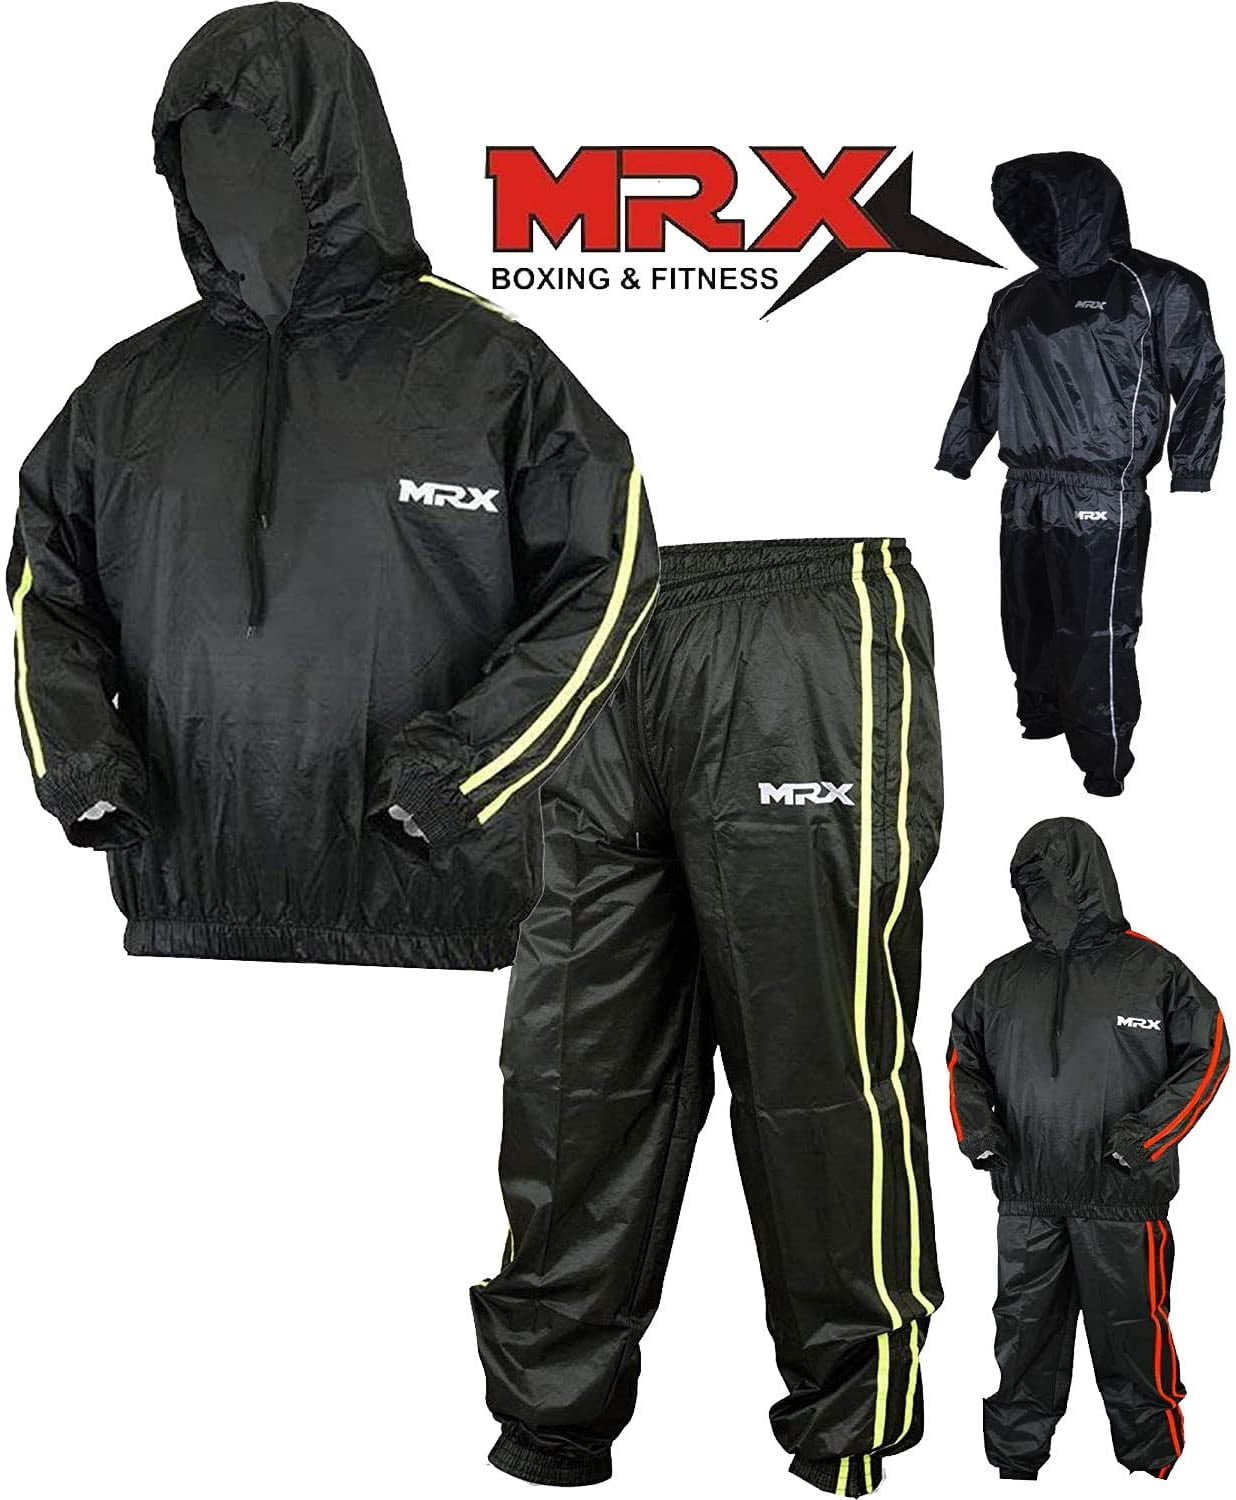 Jogging Running RDX Sauna Suit for Gym Workout & Fitness Training Sweat Suits for Men & Women Weight Loss and Slimming Exercises Black Hooded Tracksuit for Cardio Weightlifting